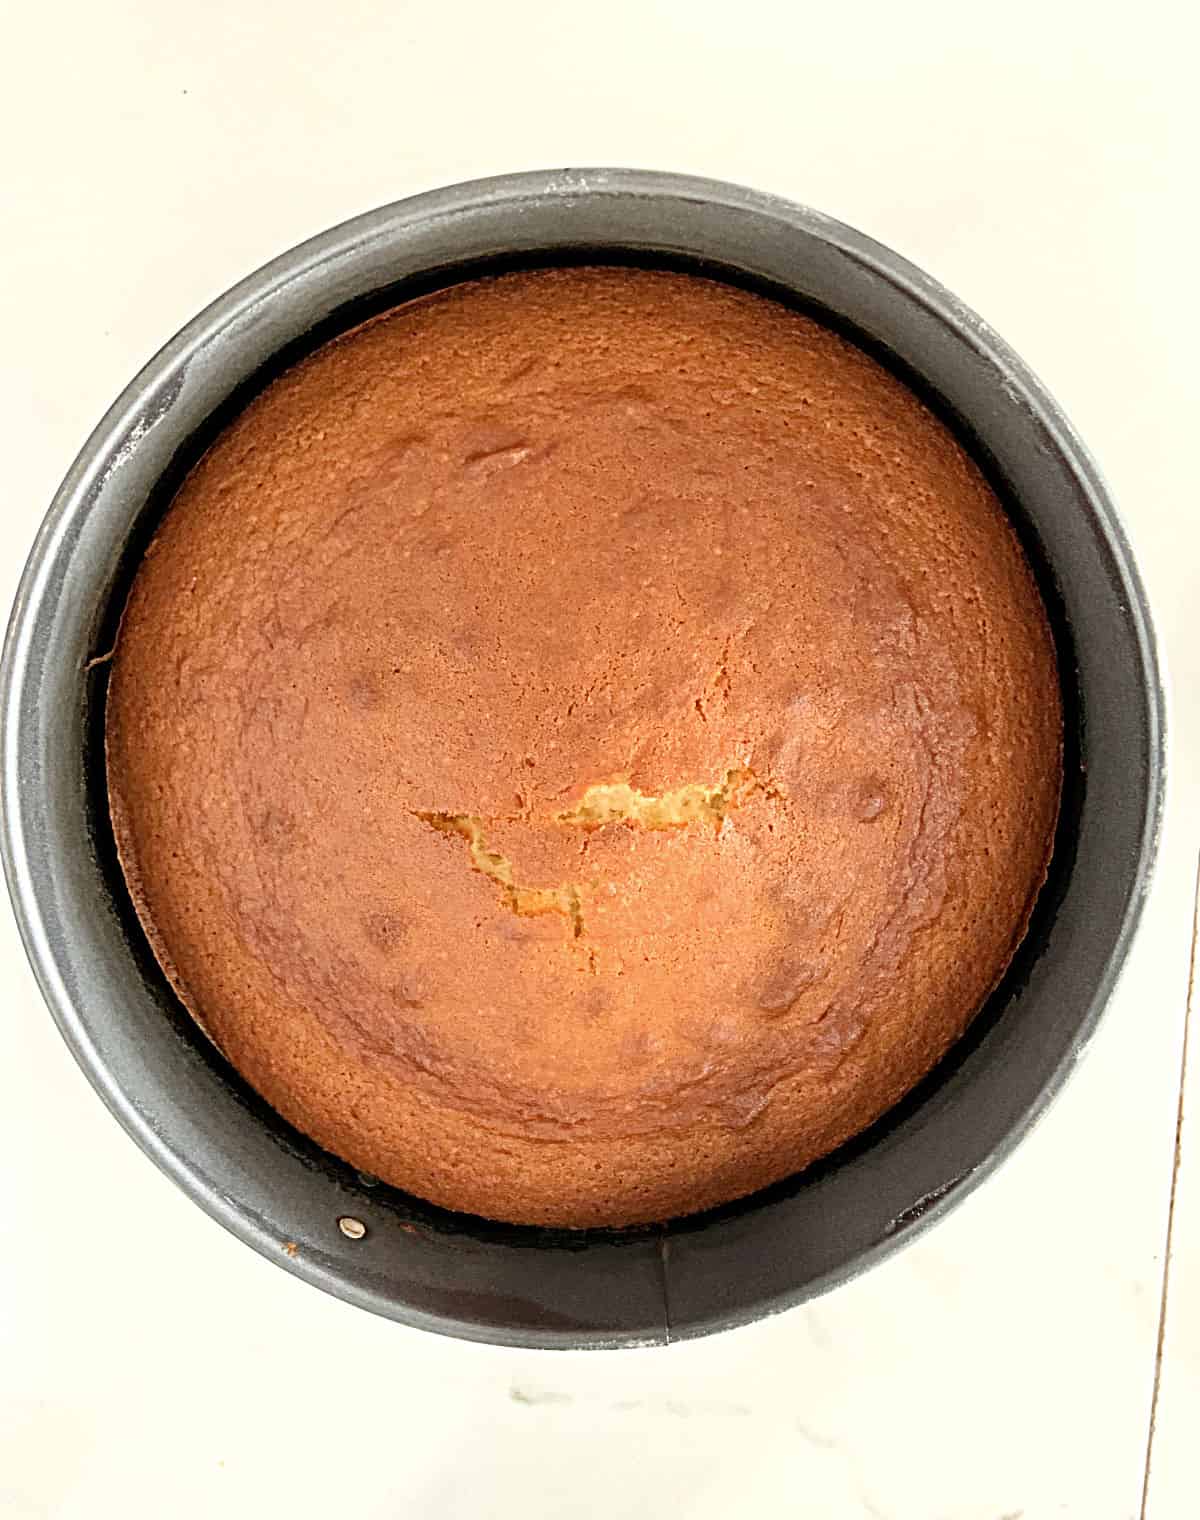 Baked golden cake in a round metal pan on a white surface